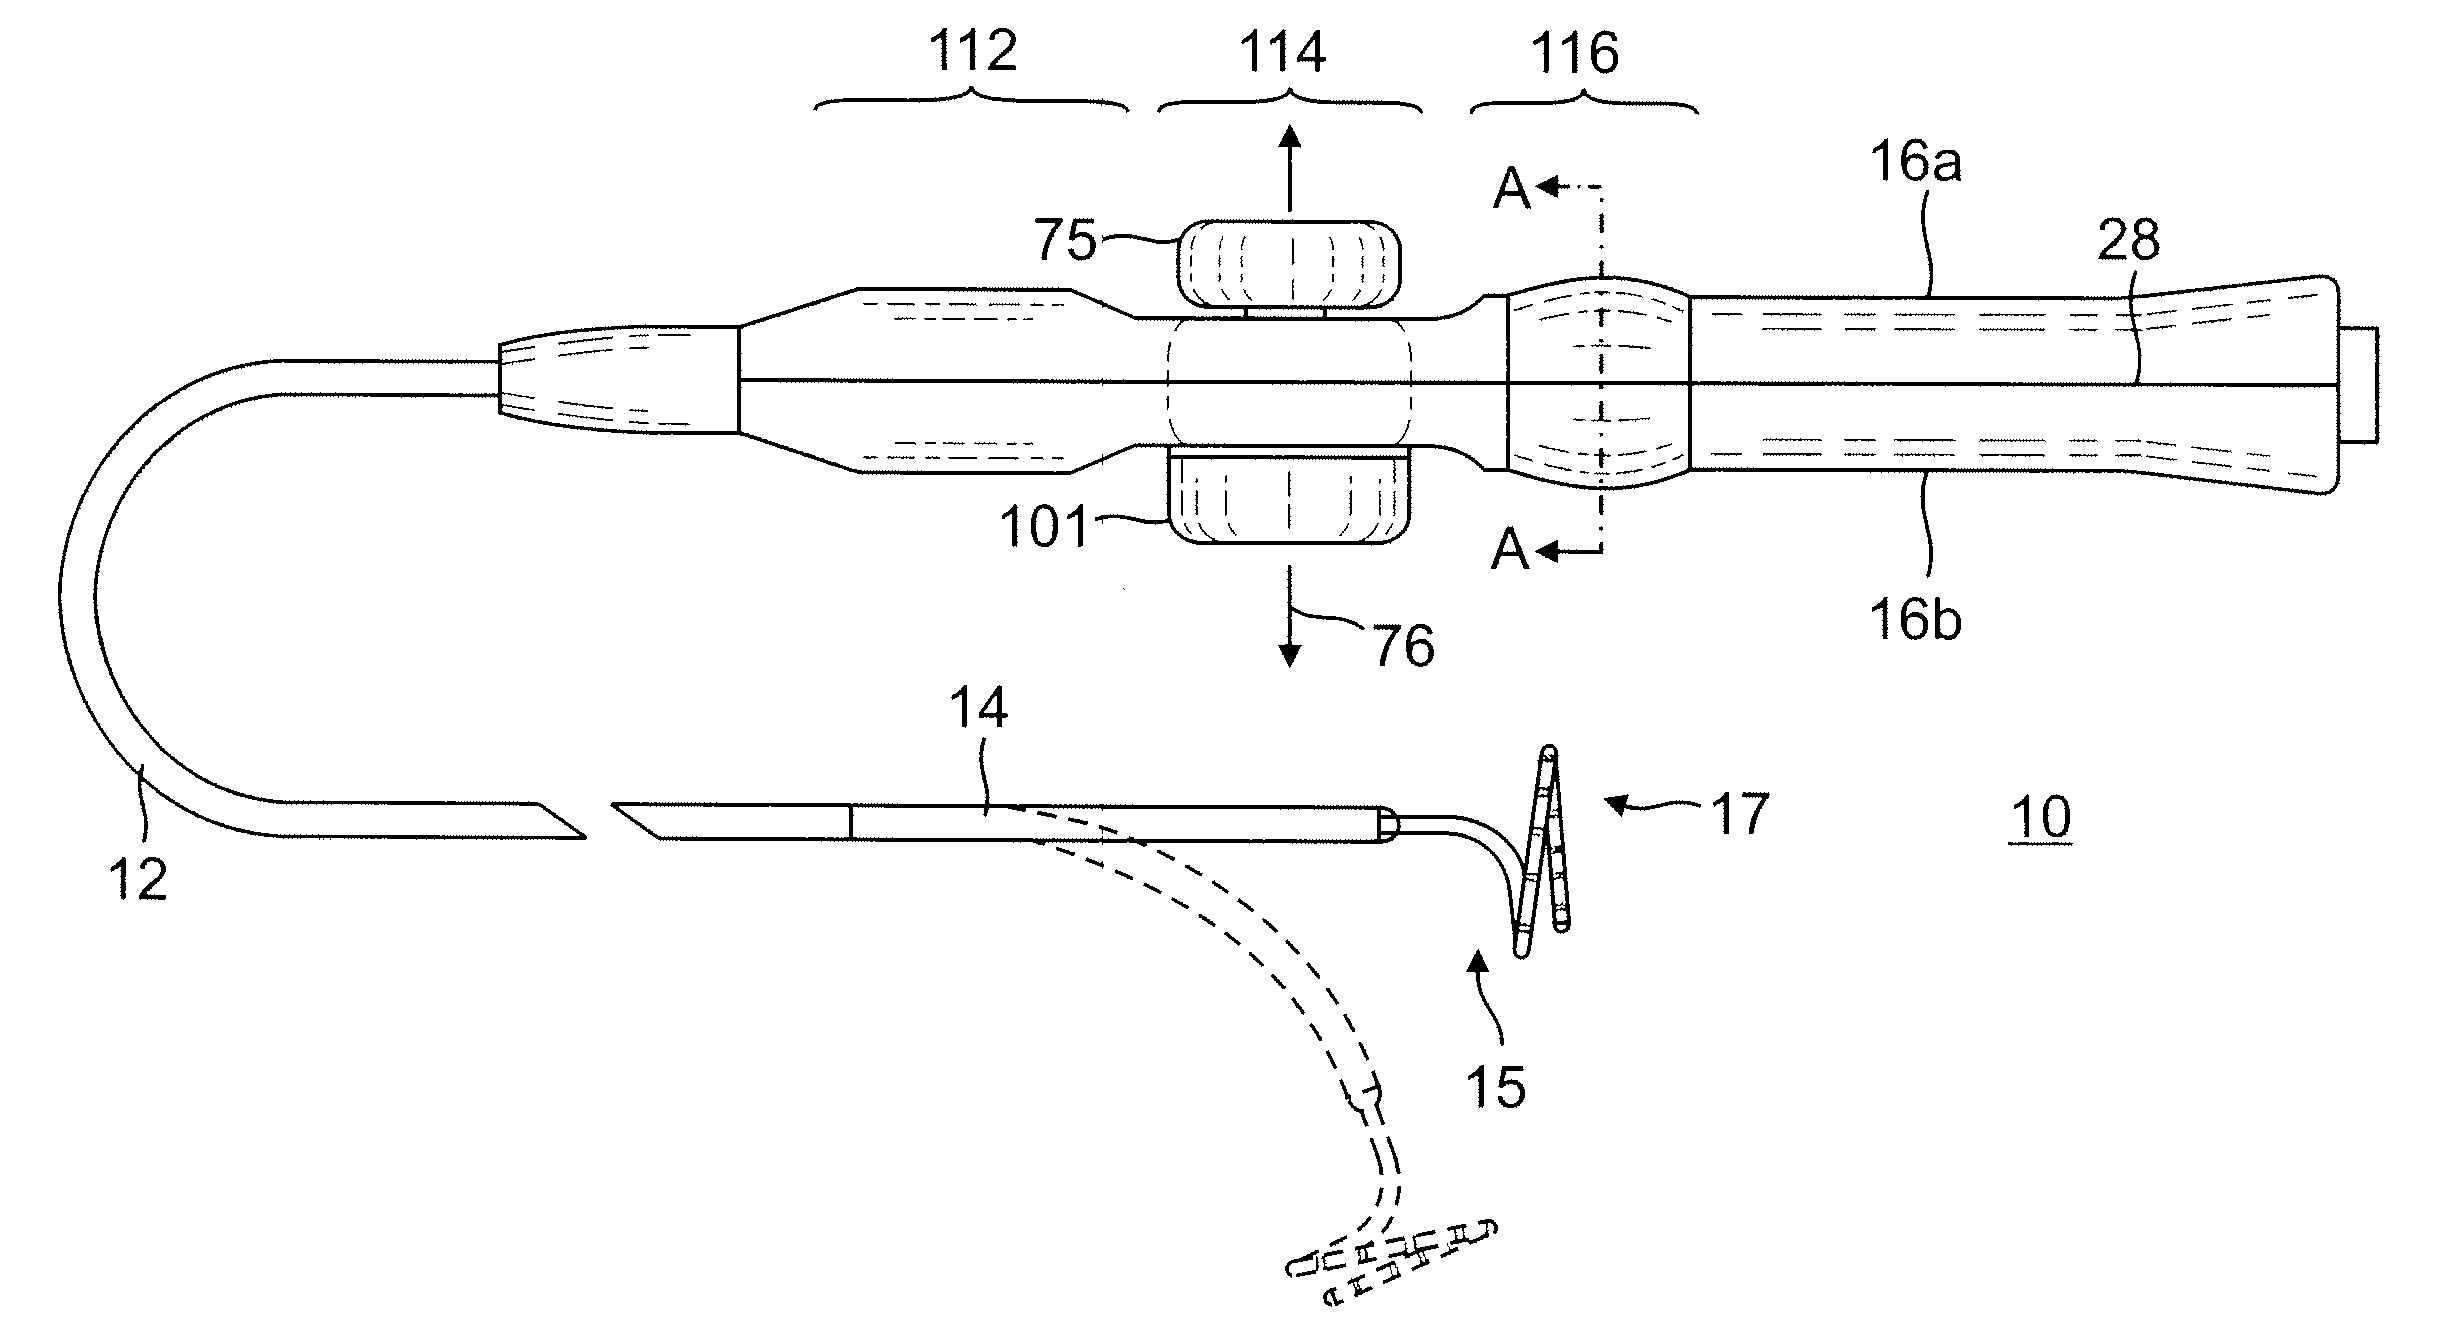 Catheter with multi-functional control handle having linear mechanism